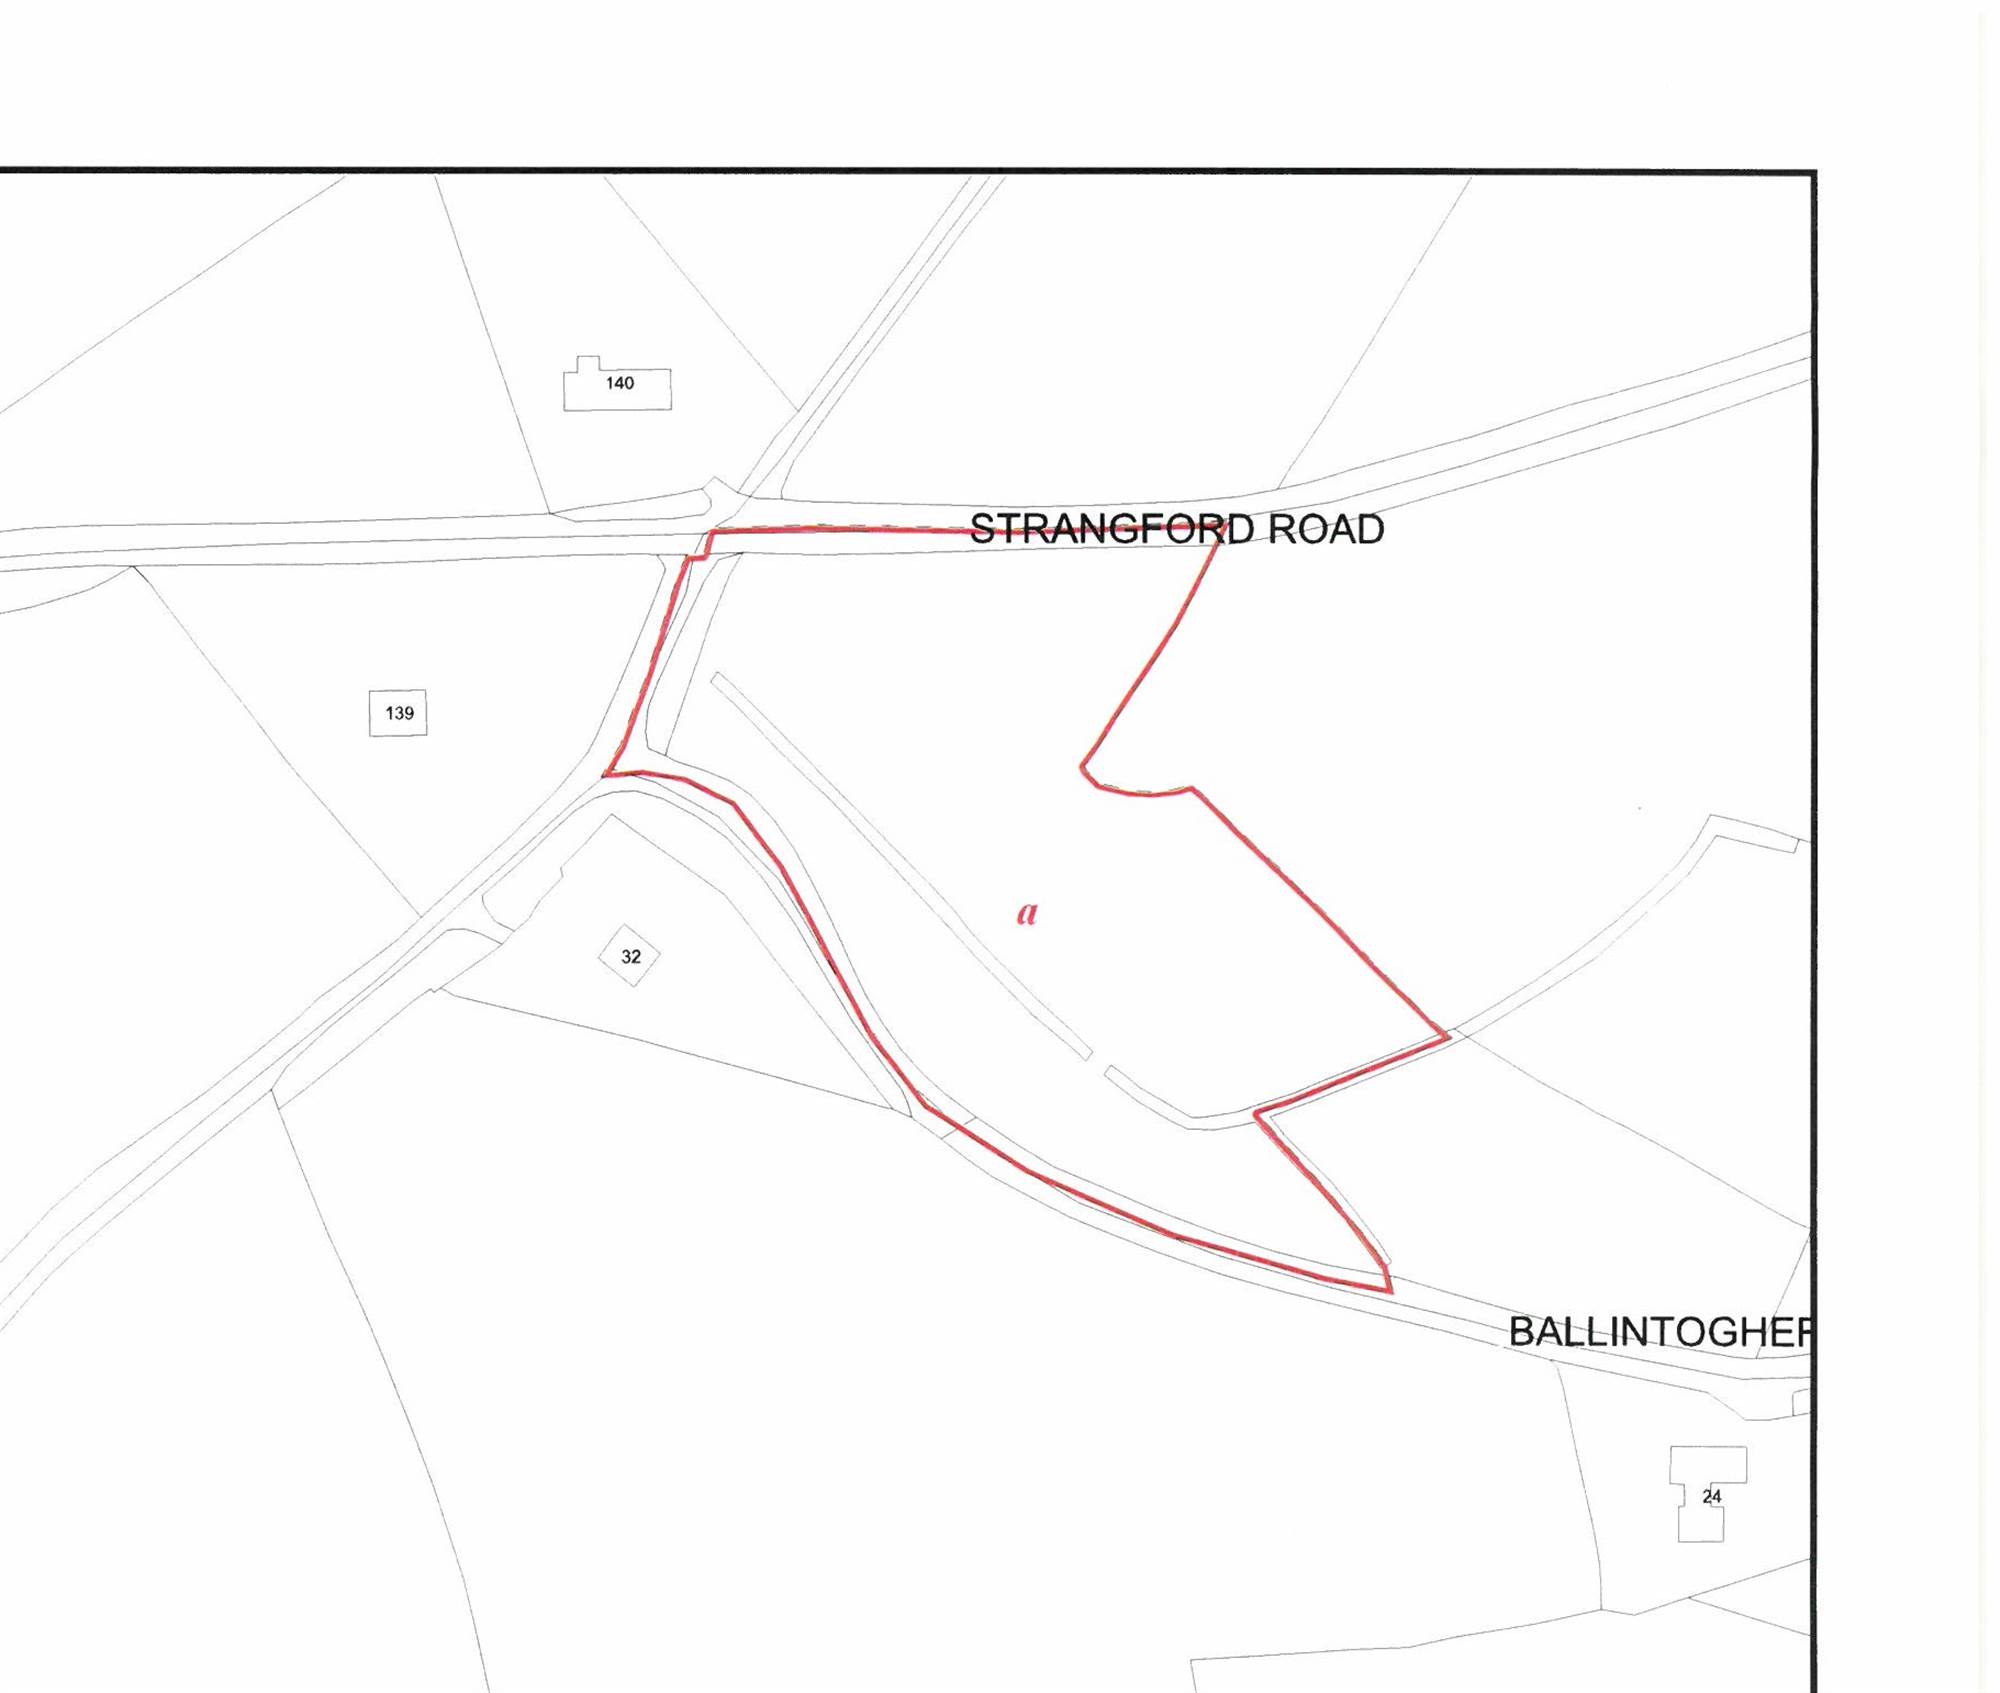 2.7 acres of land off Strangford Road and Ballintogher Road